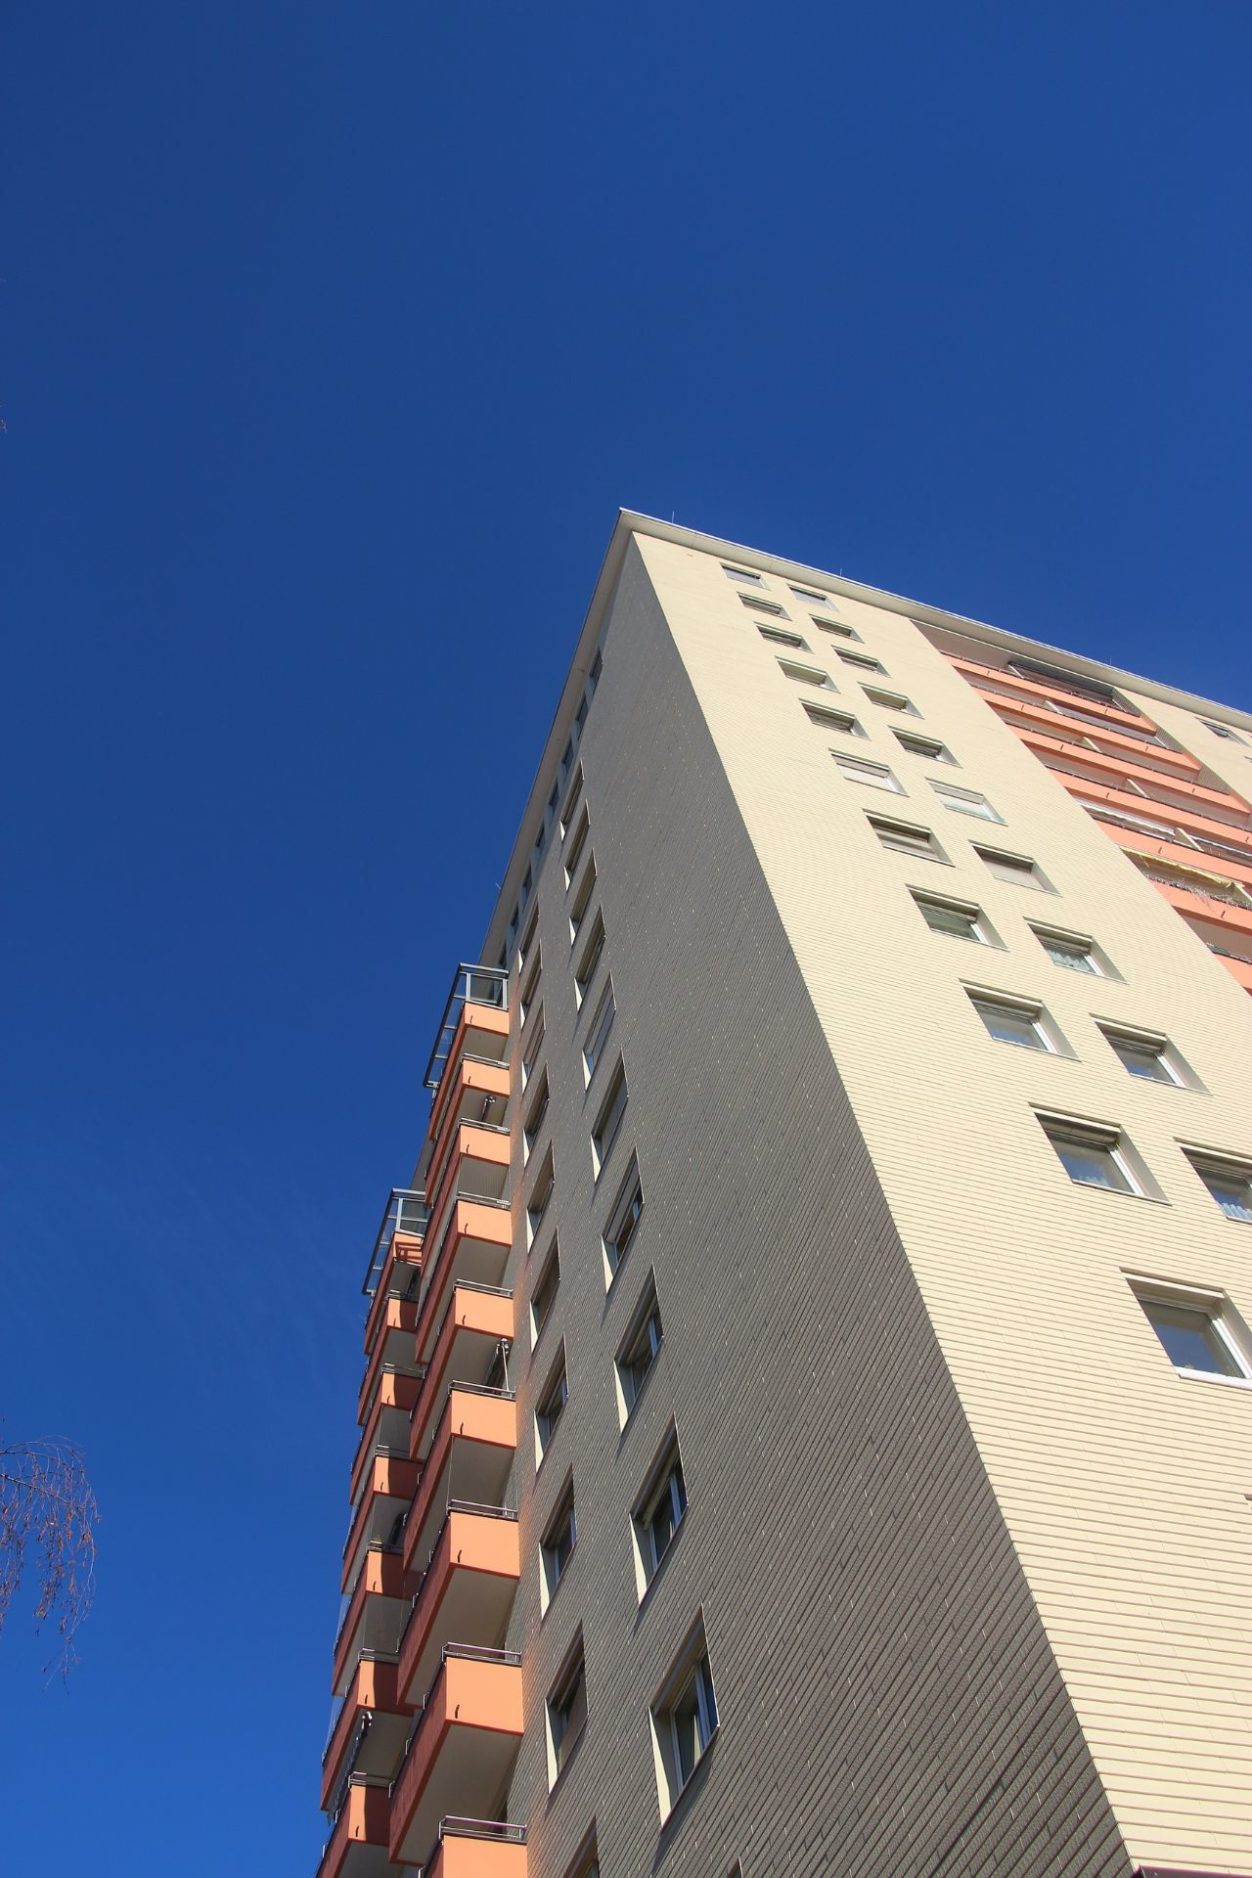 tall apartment building looking up from below, against a clear blue sky